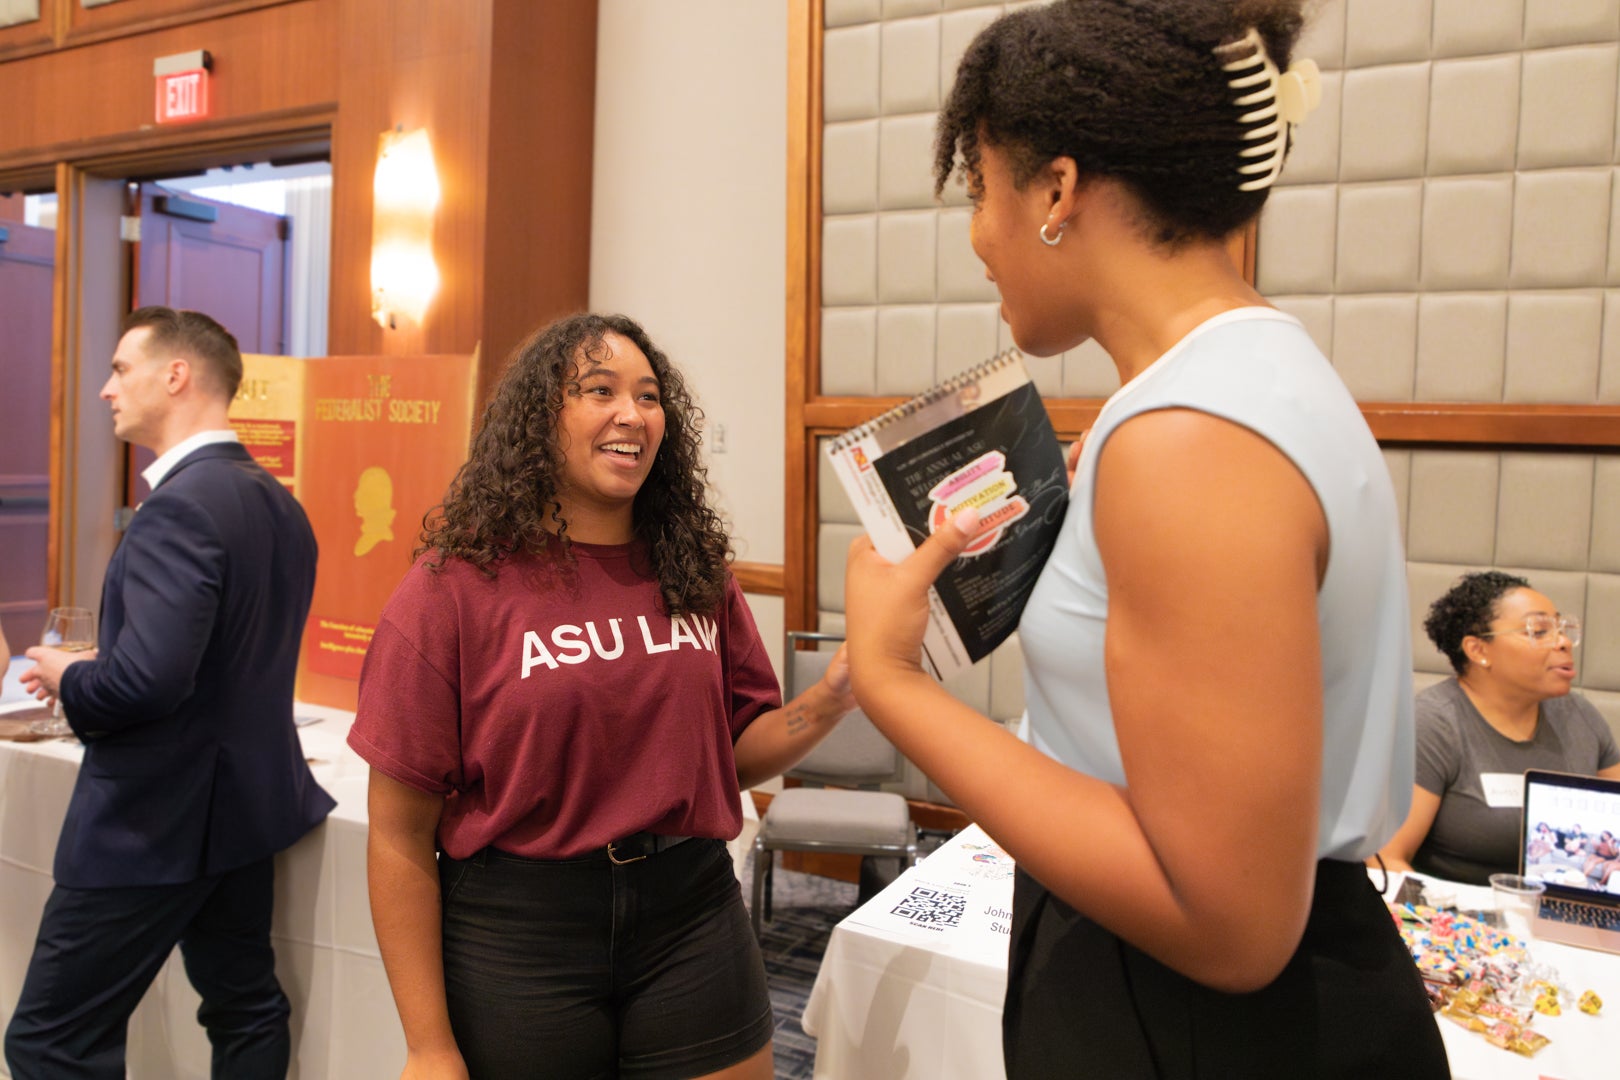 Two ASU Law students talking to each other during the student organization fair.